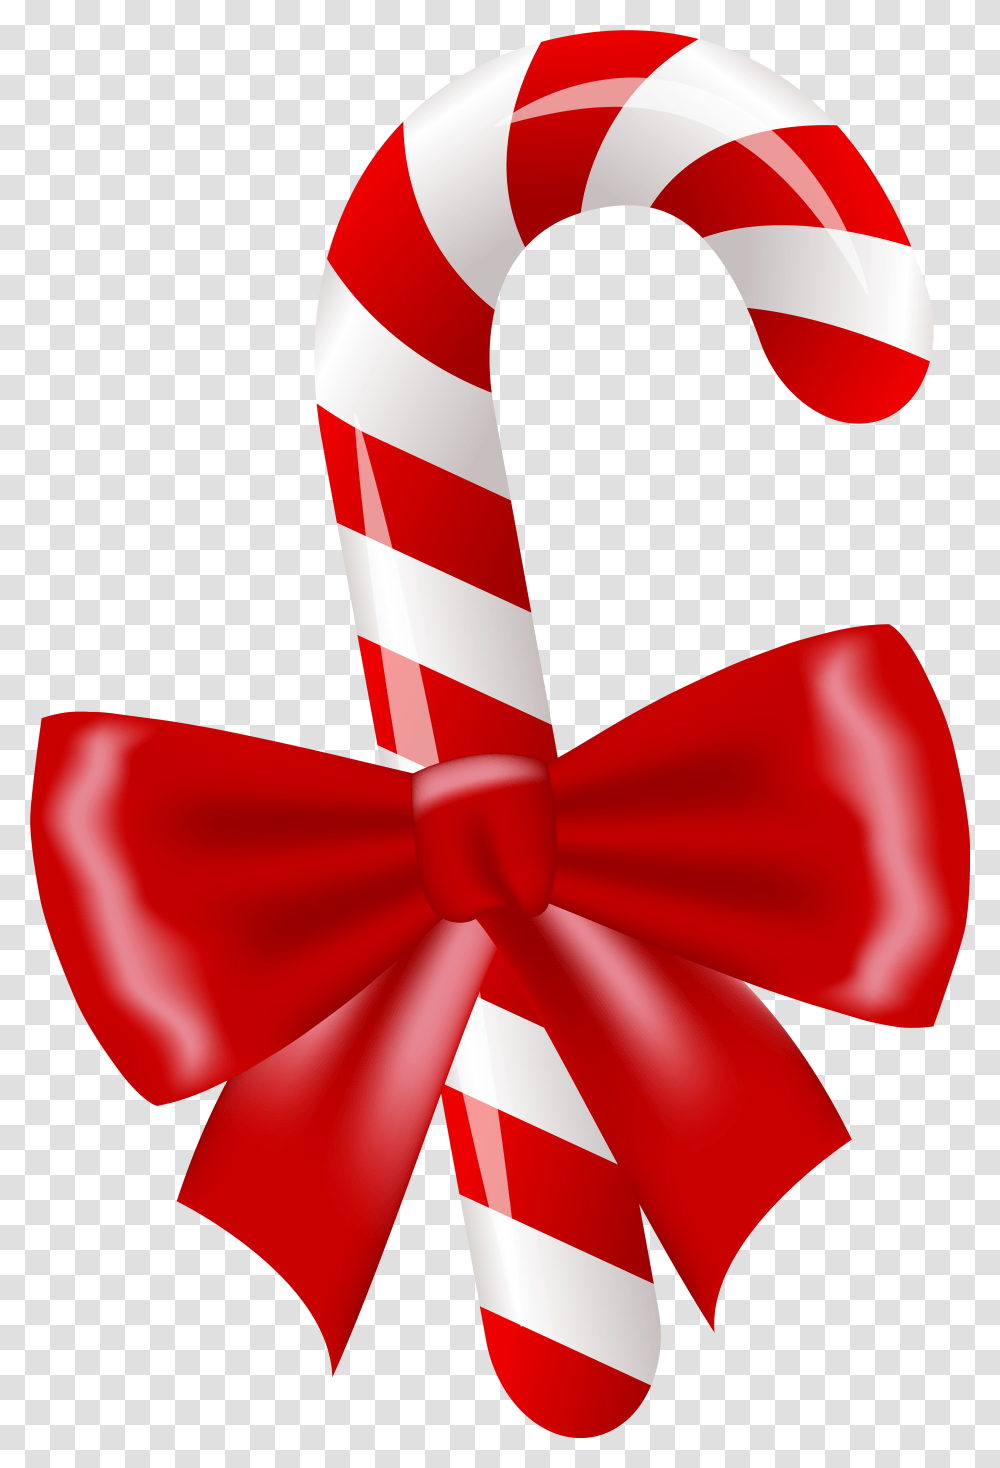 Library Of Christmas Candy Cane Black Background, Tie, Accessories, Accessory, Necktie Transparent Png